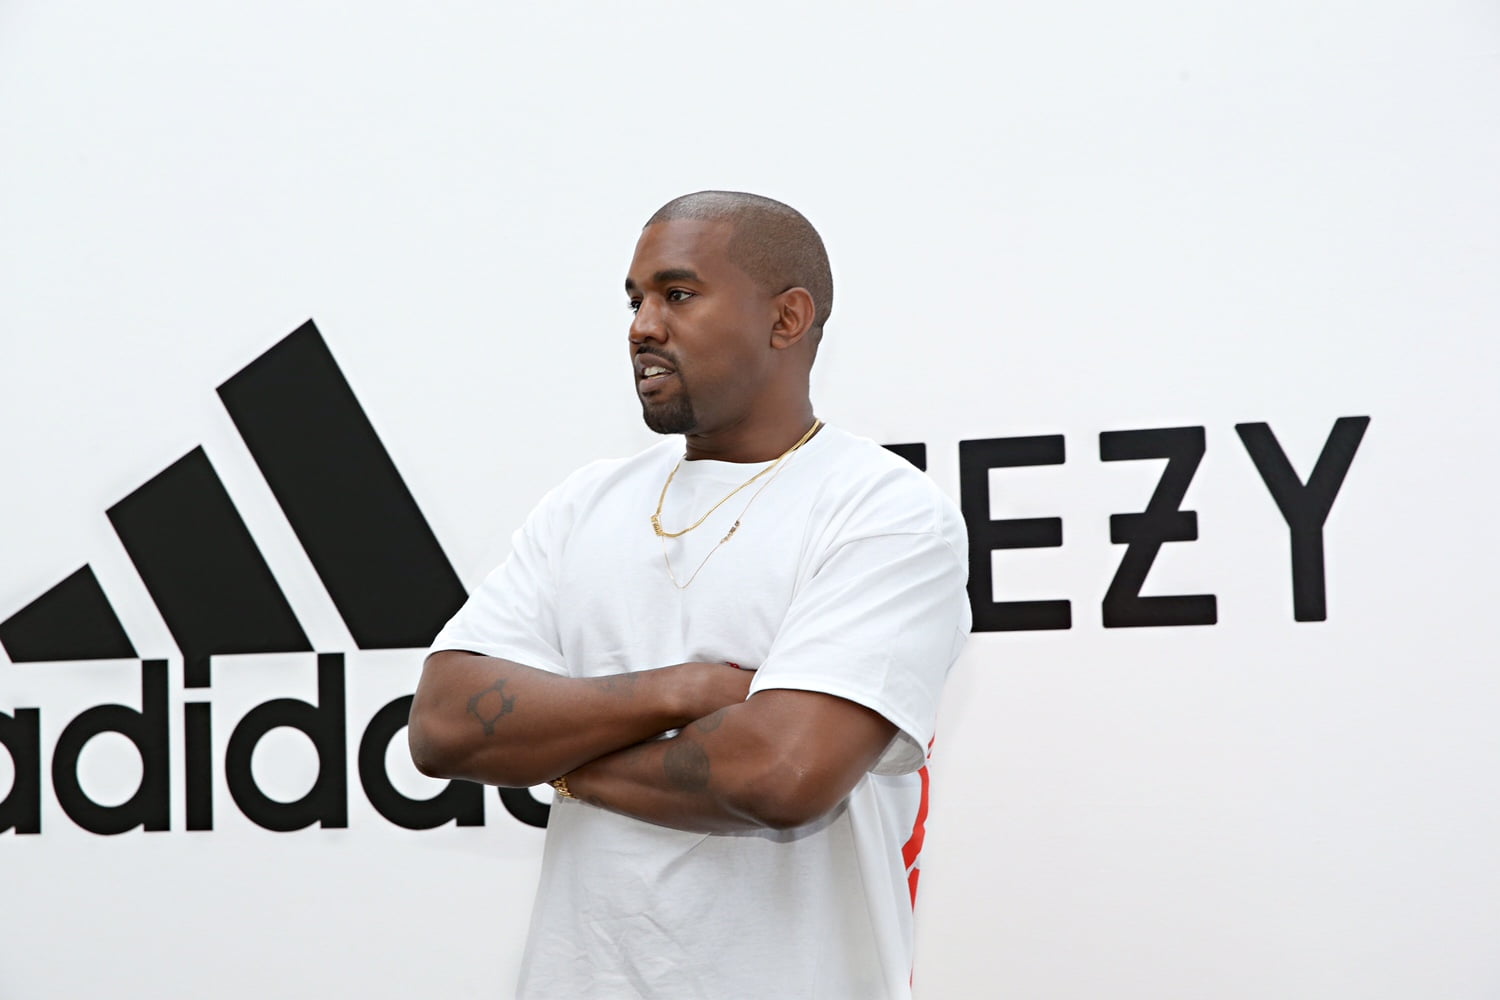 Kanye West's New Yeezy 450 Shoes Sell Out In Under A Minute